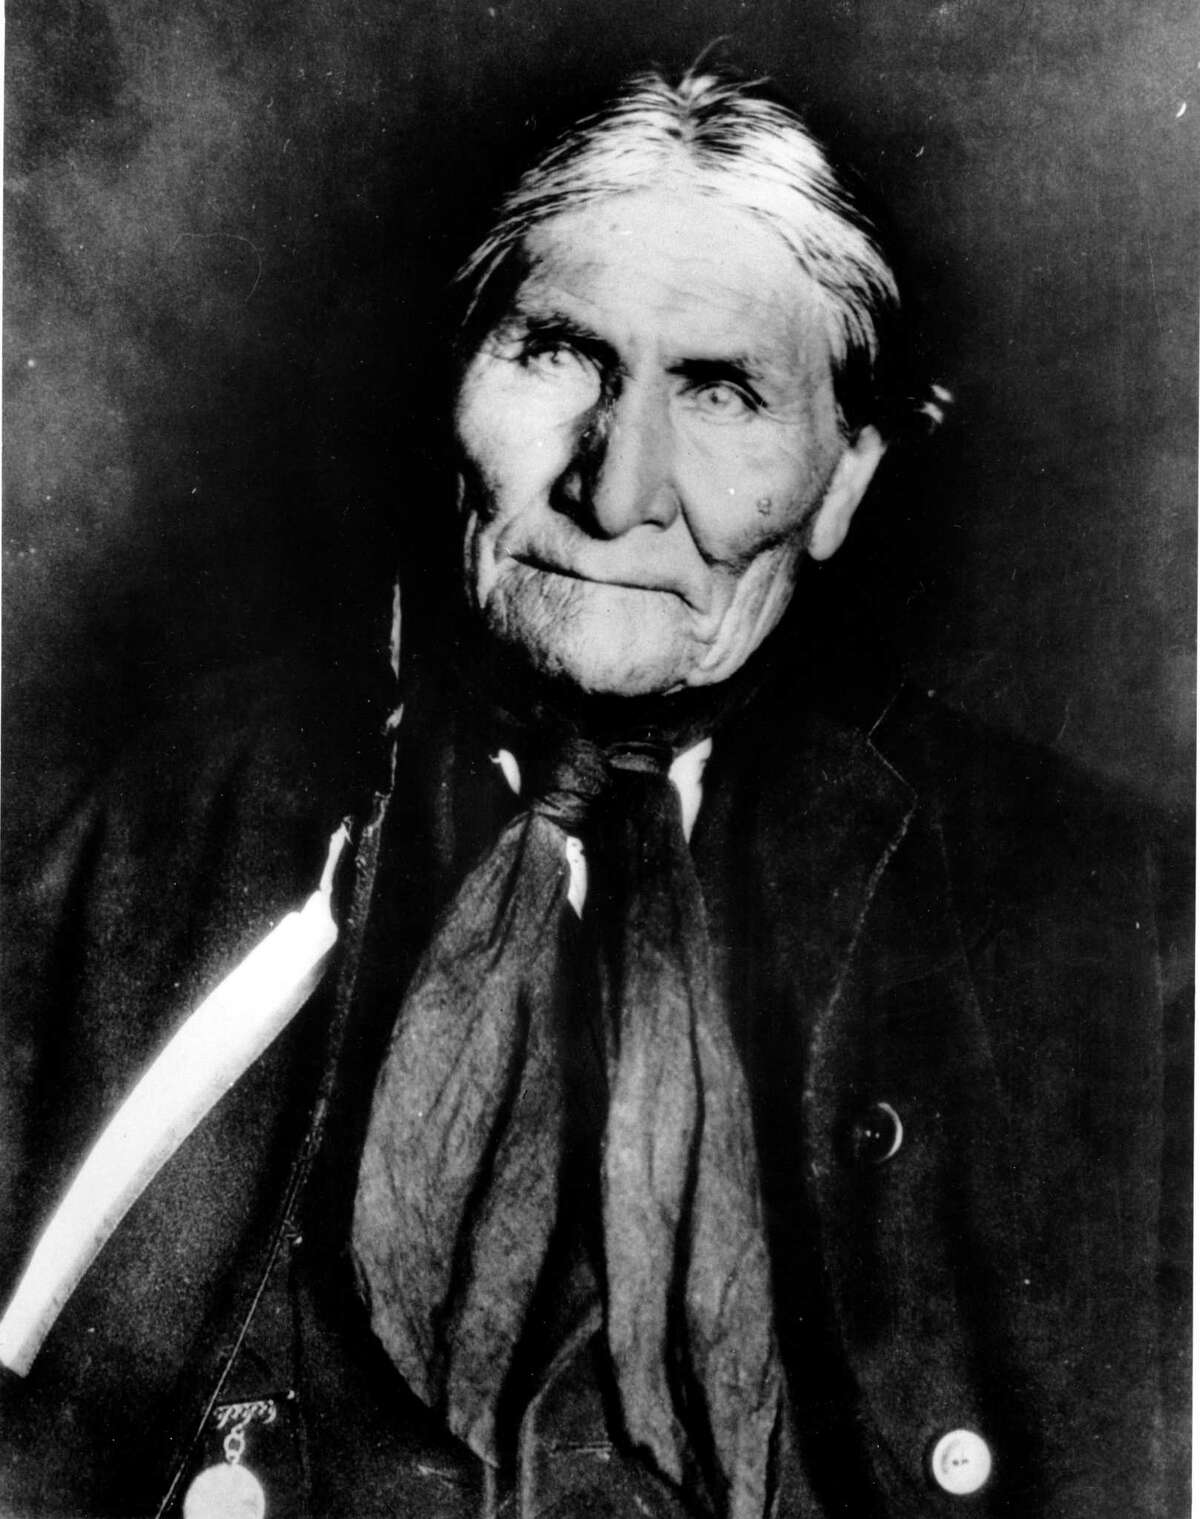 This undated file photo shows the Chiricahua Apache Geronimo, late in his life.